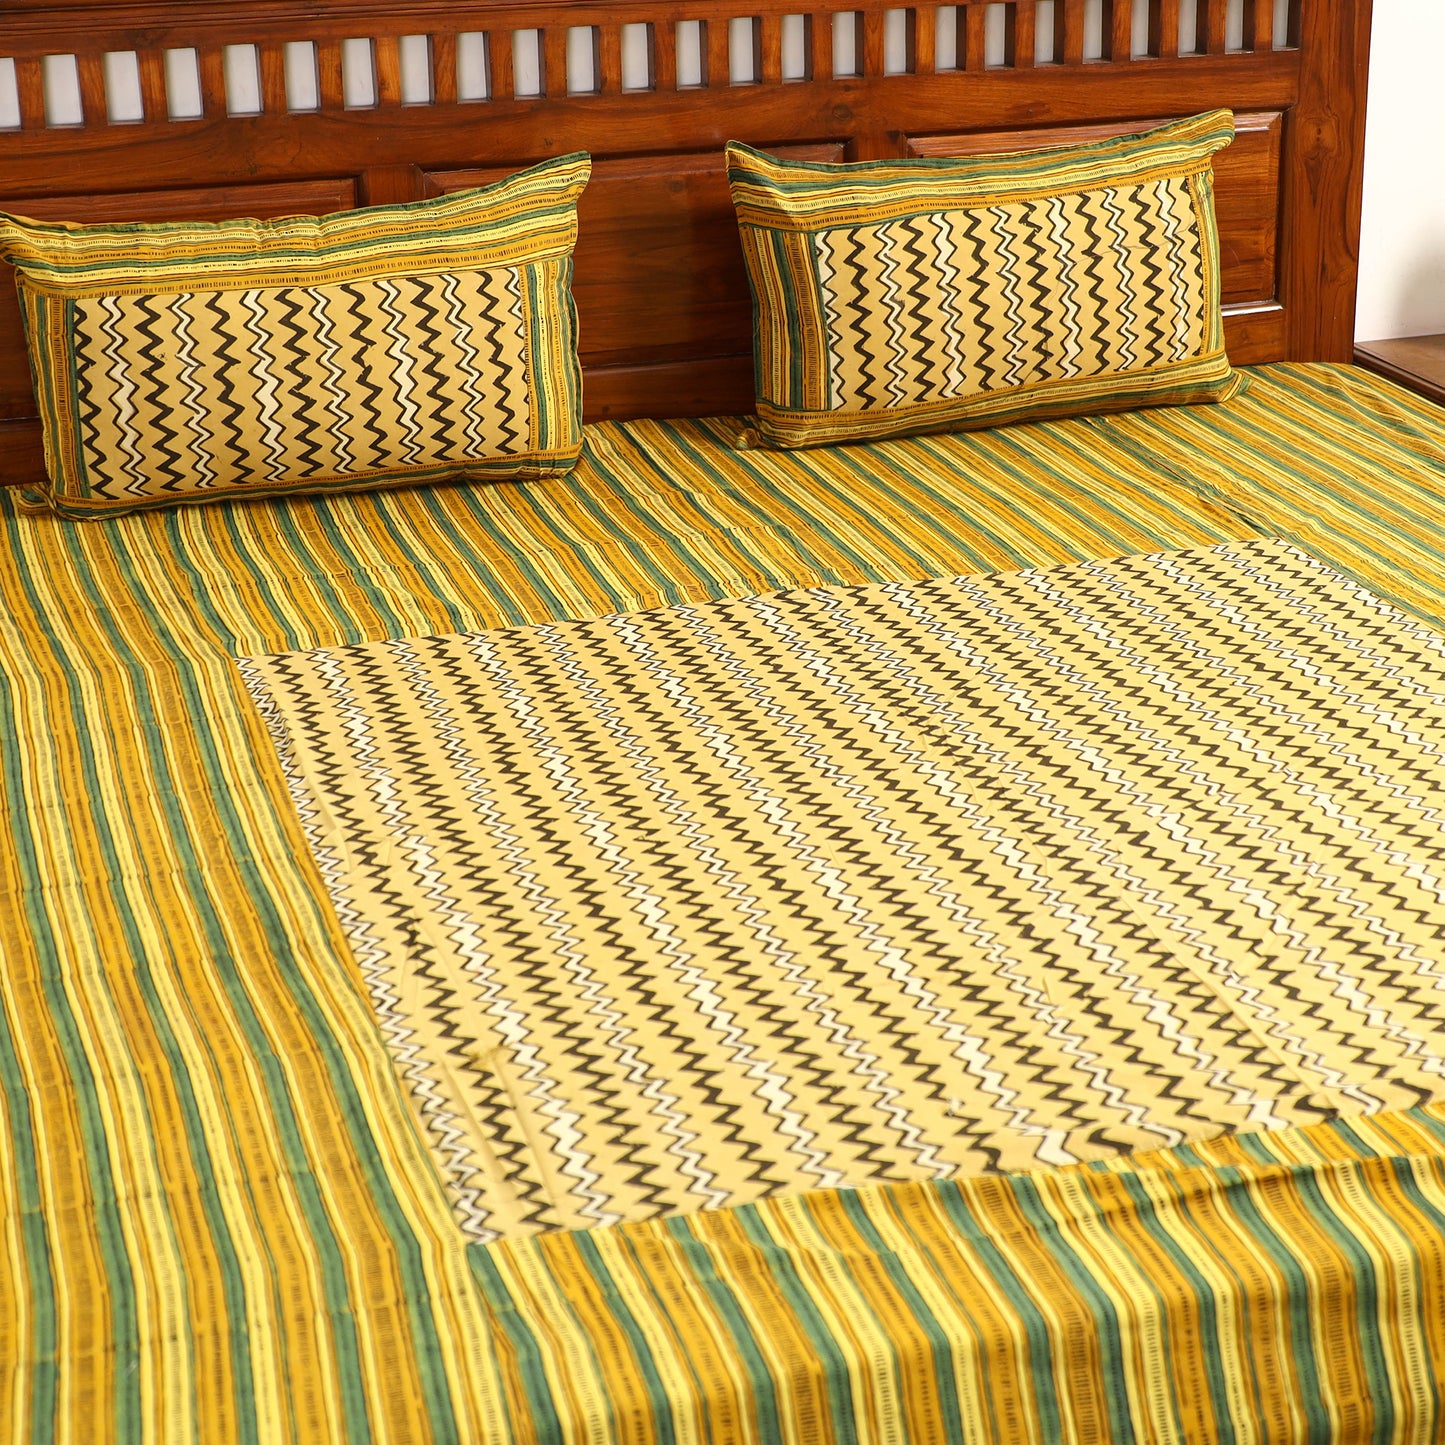 ajrakh double bed cover set